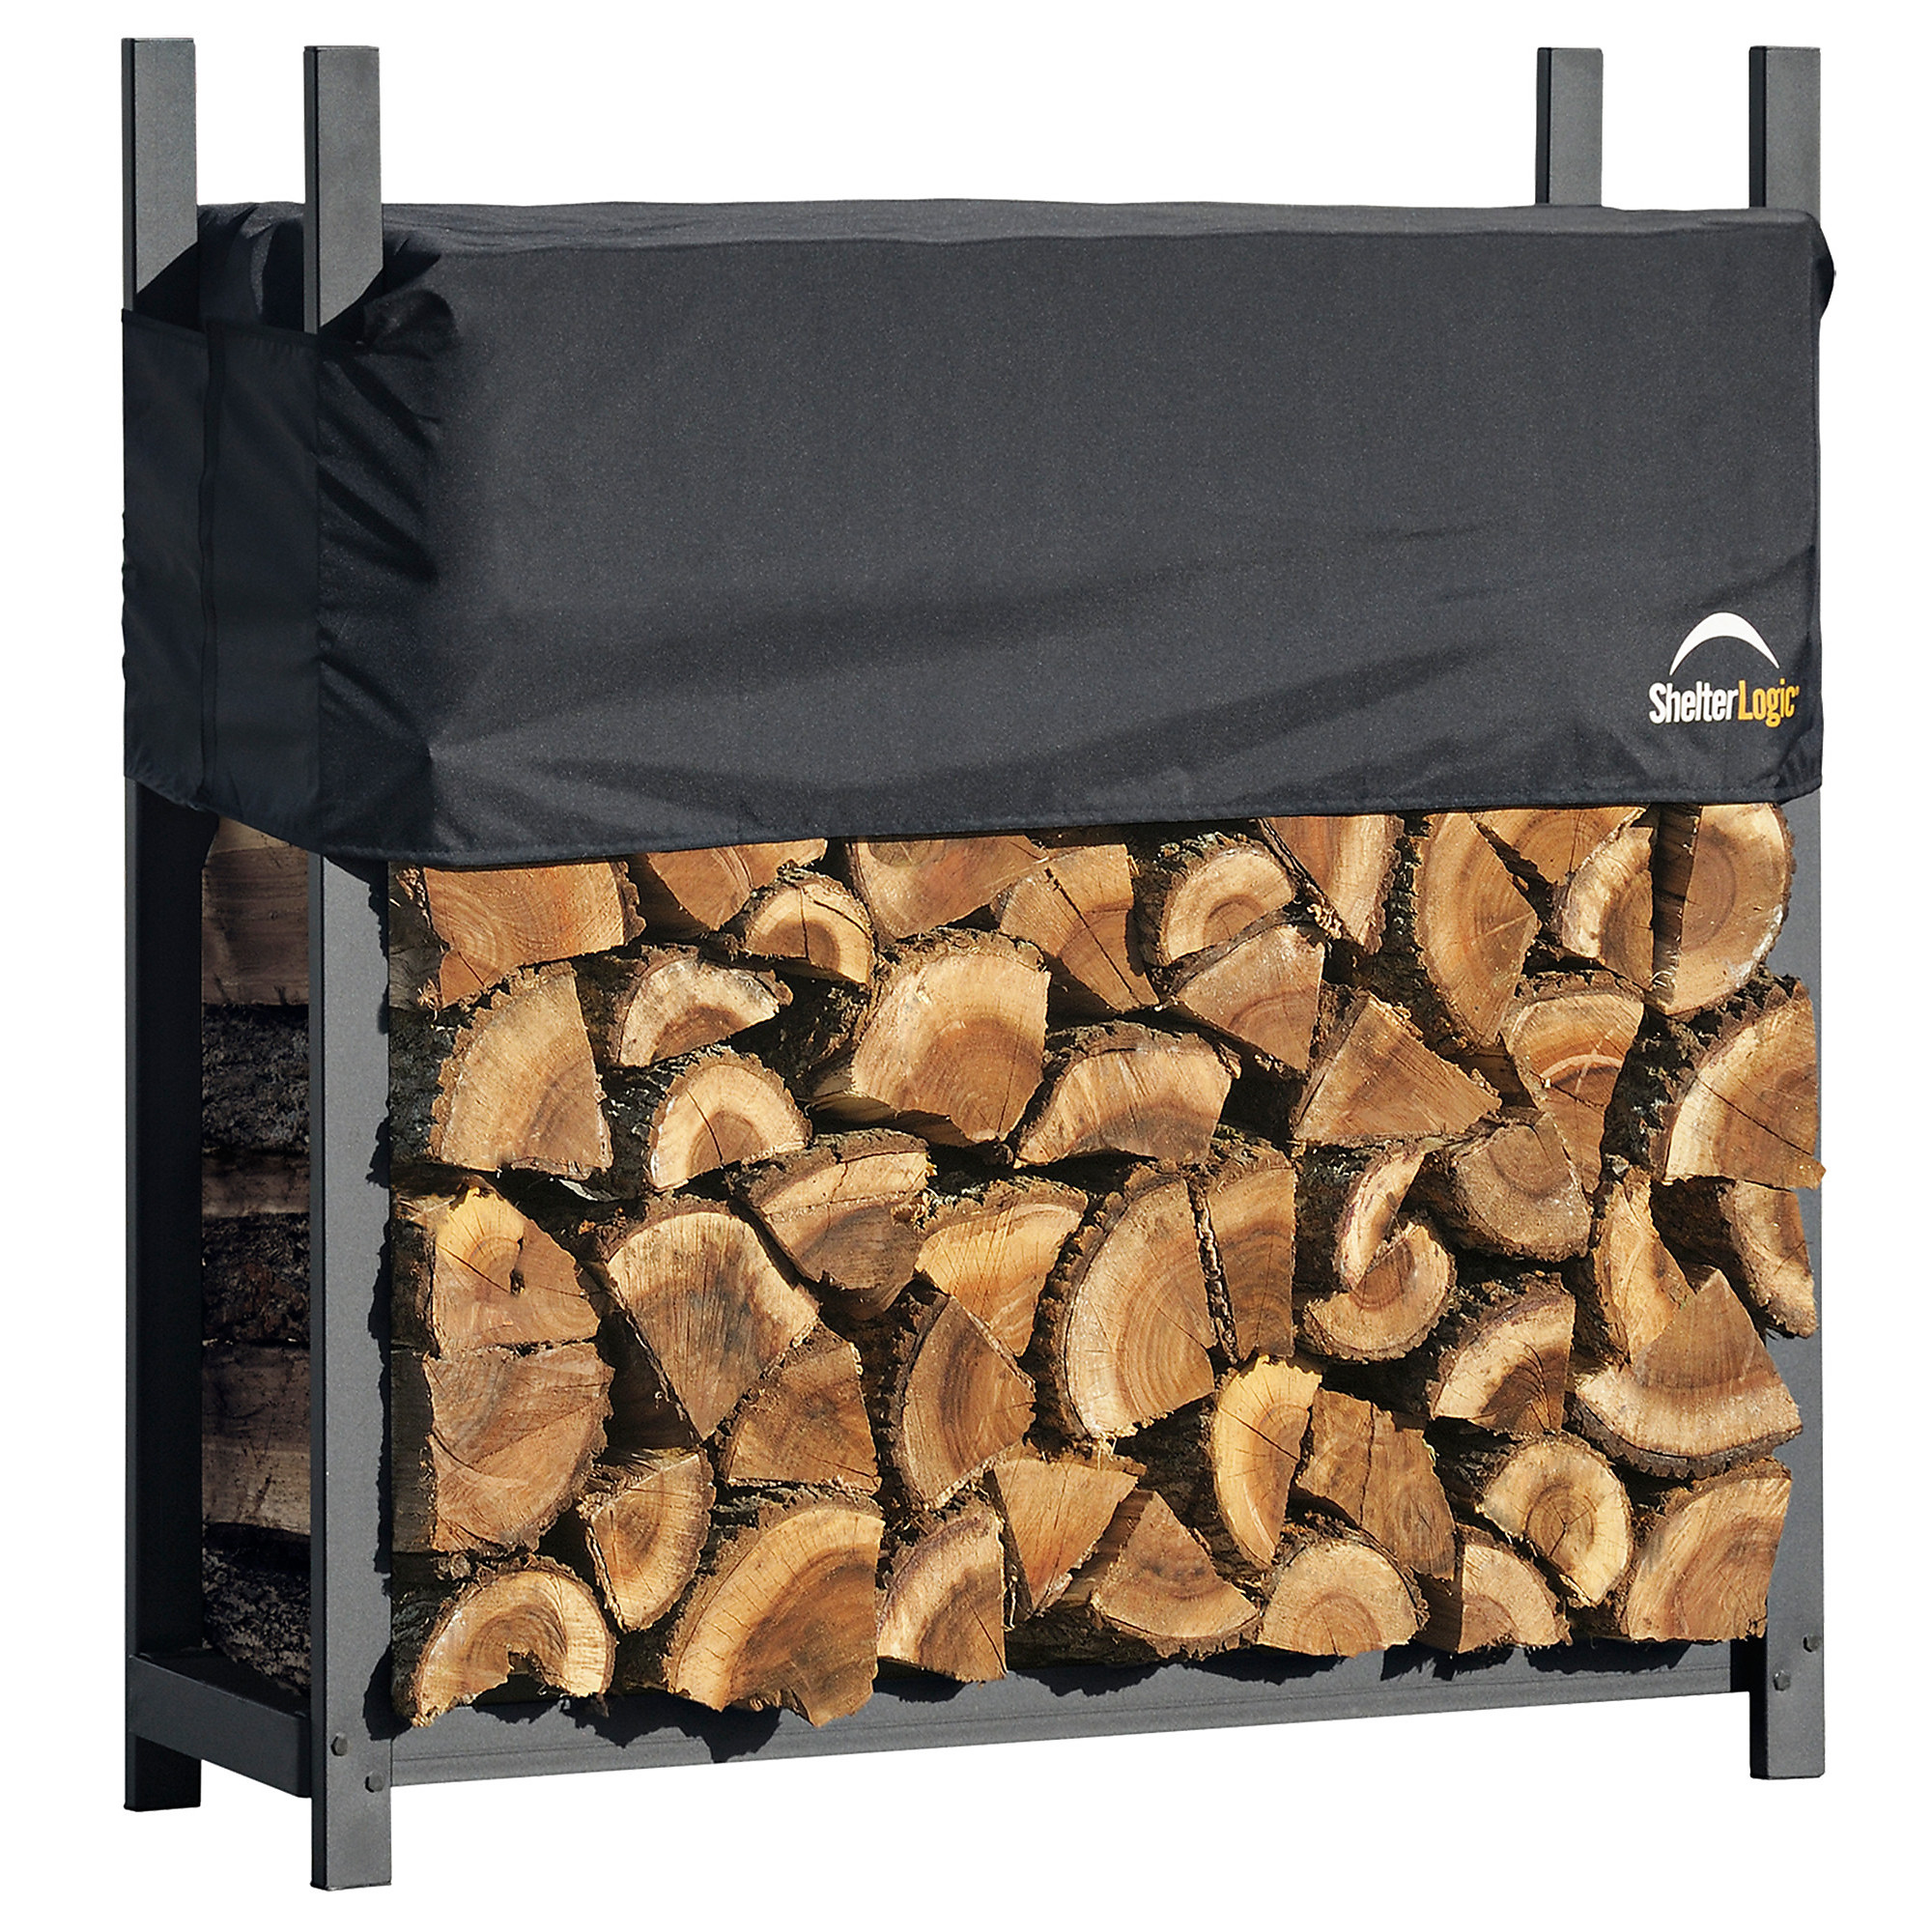 ShelterLogic, Ultra Duty Firewood Rack with Cover in 4ft., Length 4.1 ft, Material Steel, Model 90474